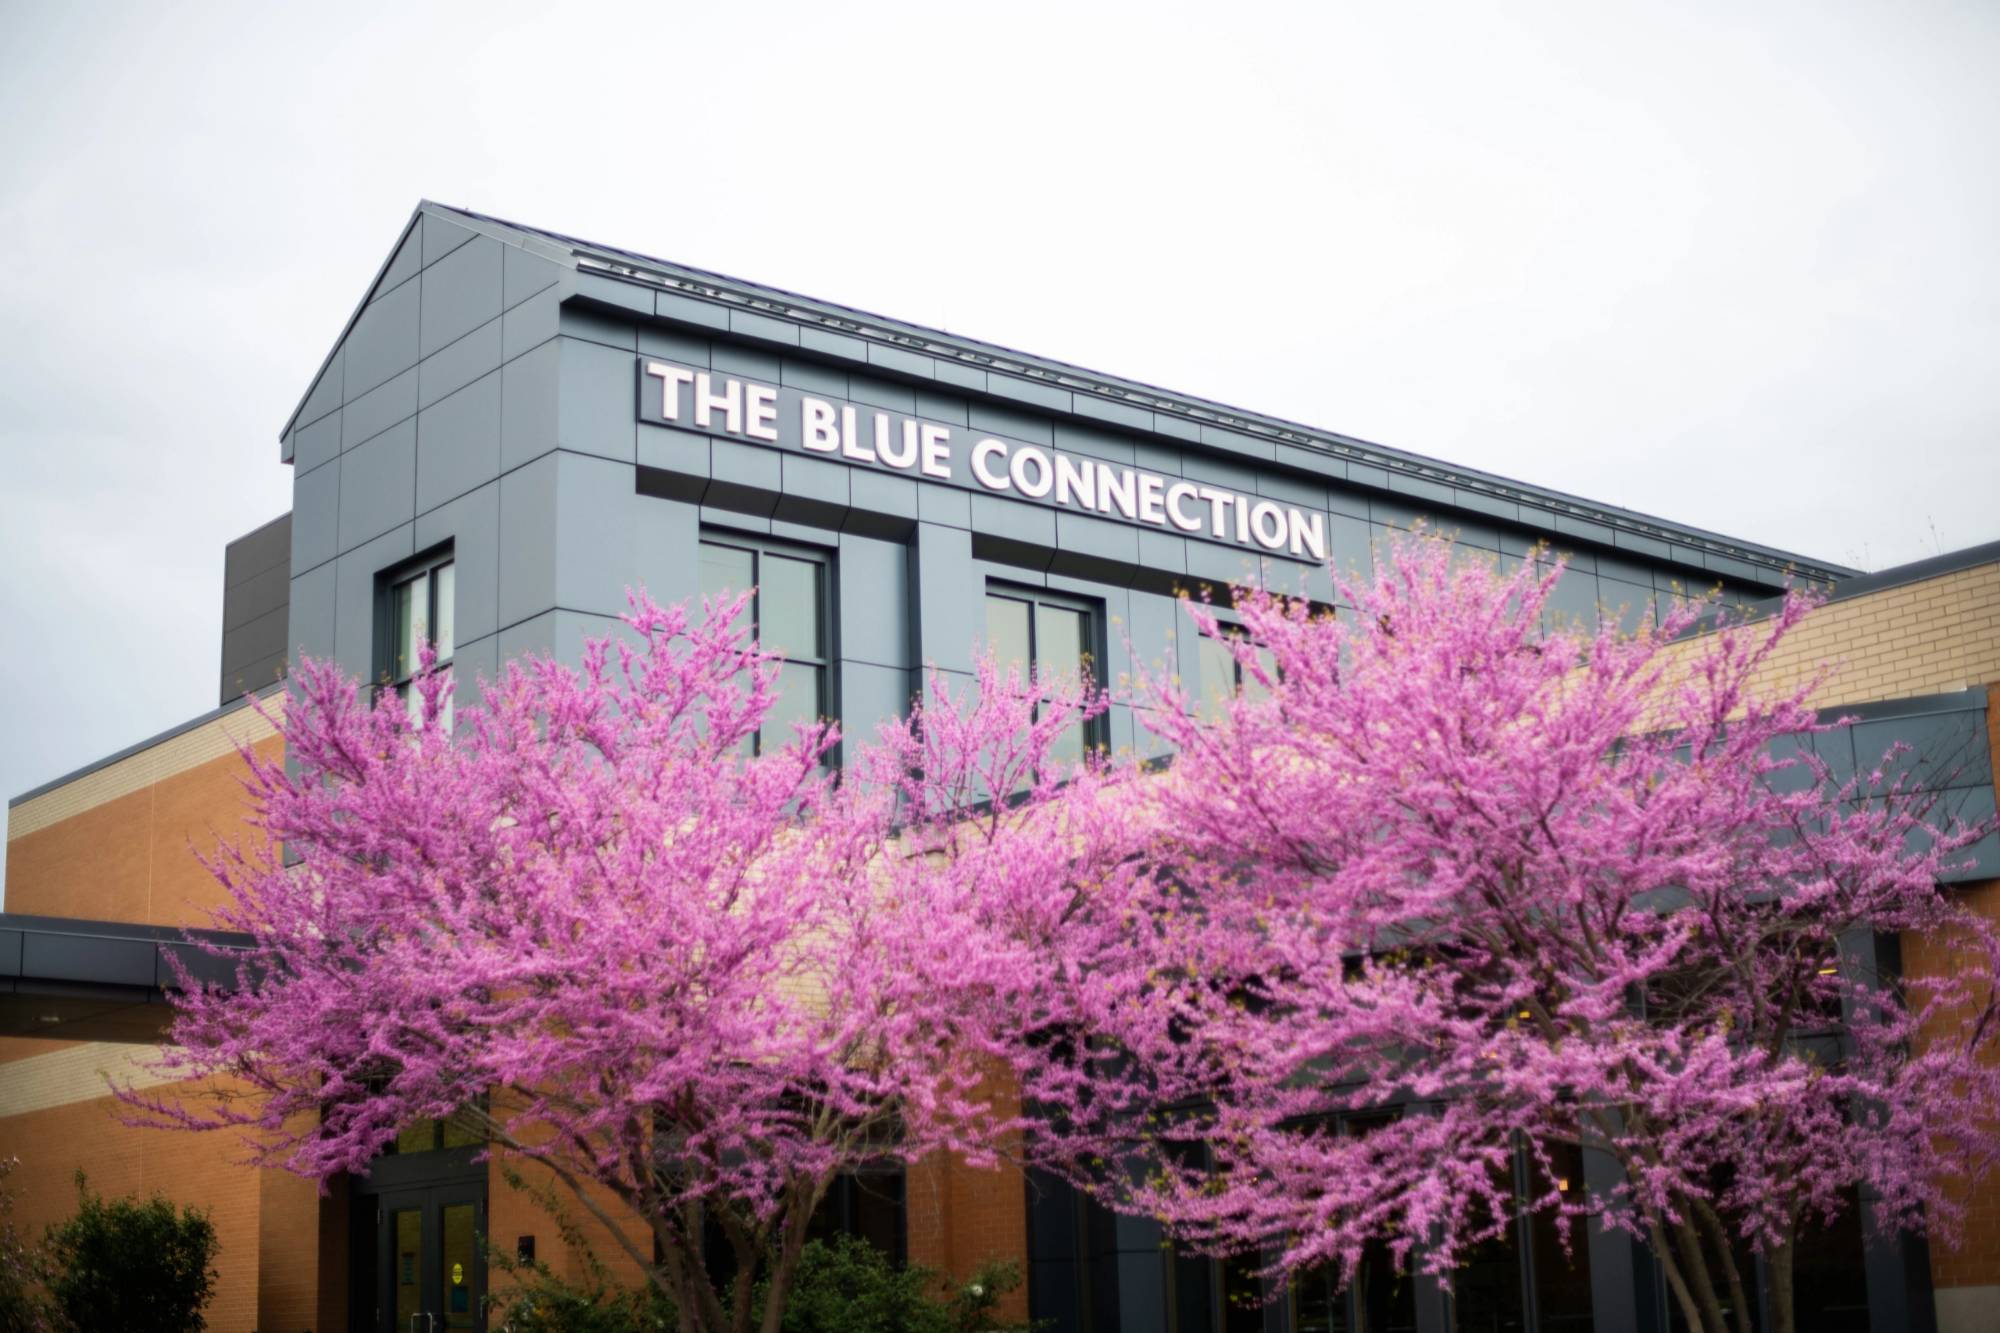 The Blue Connection Building